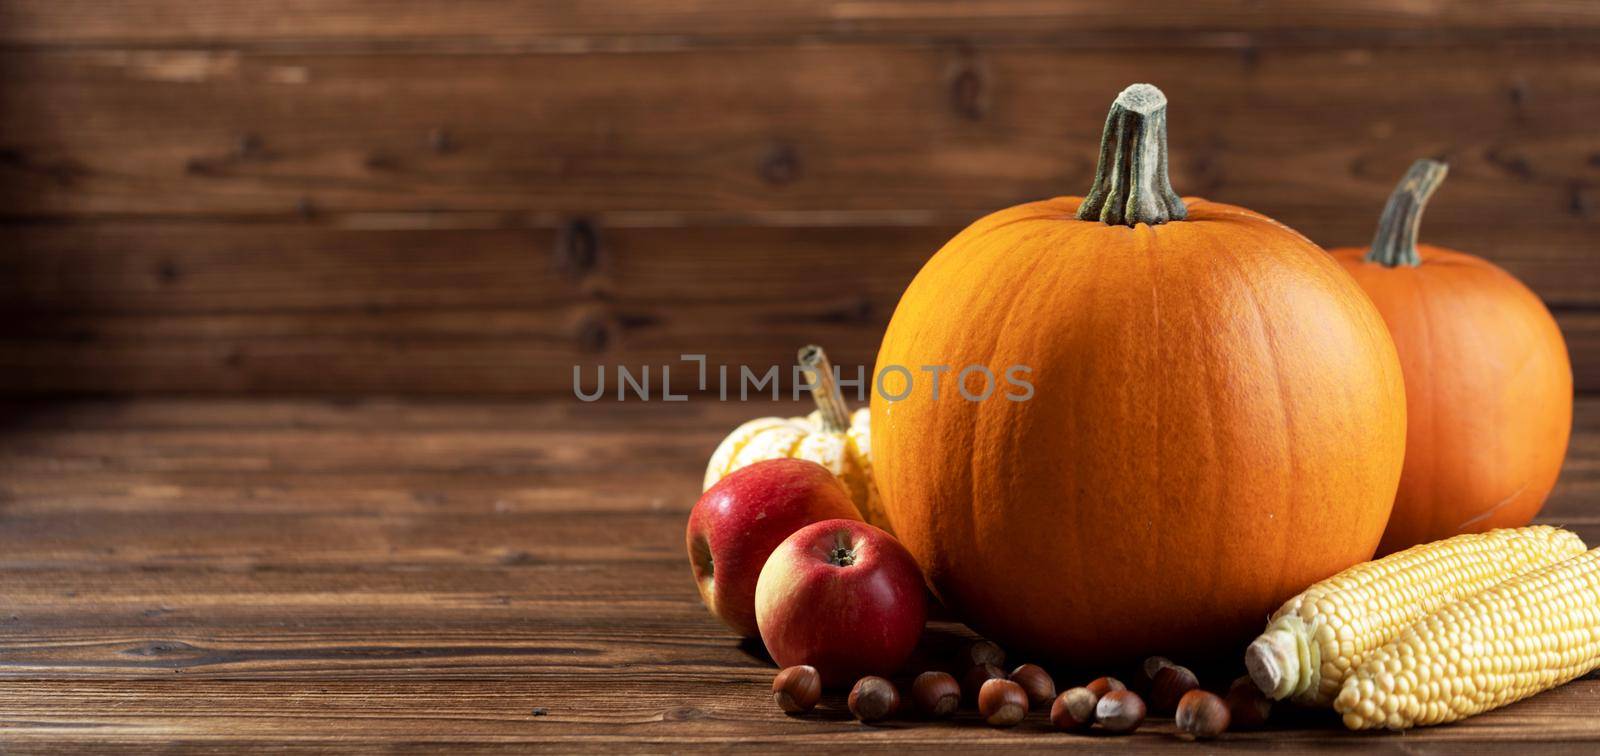 Autumn harvest still life with pumpkins by Yellowj